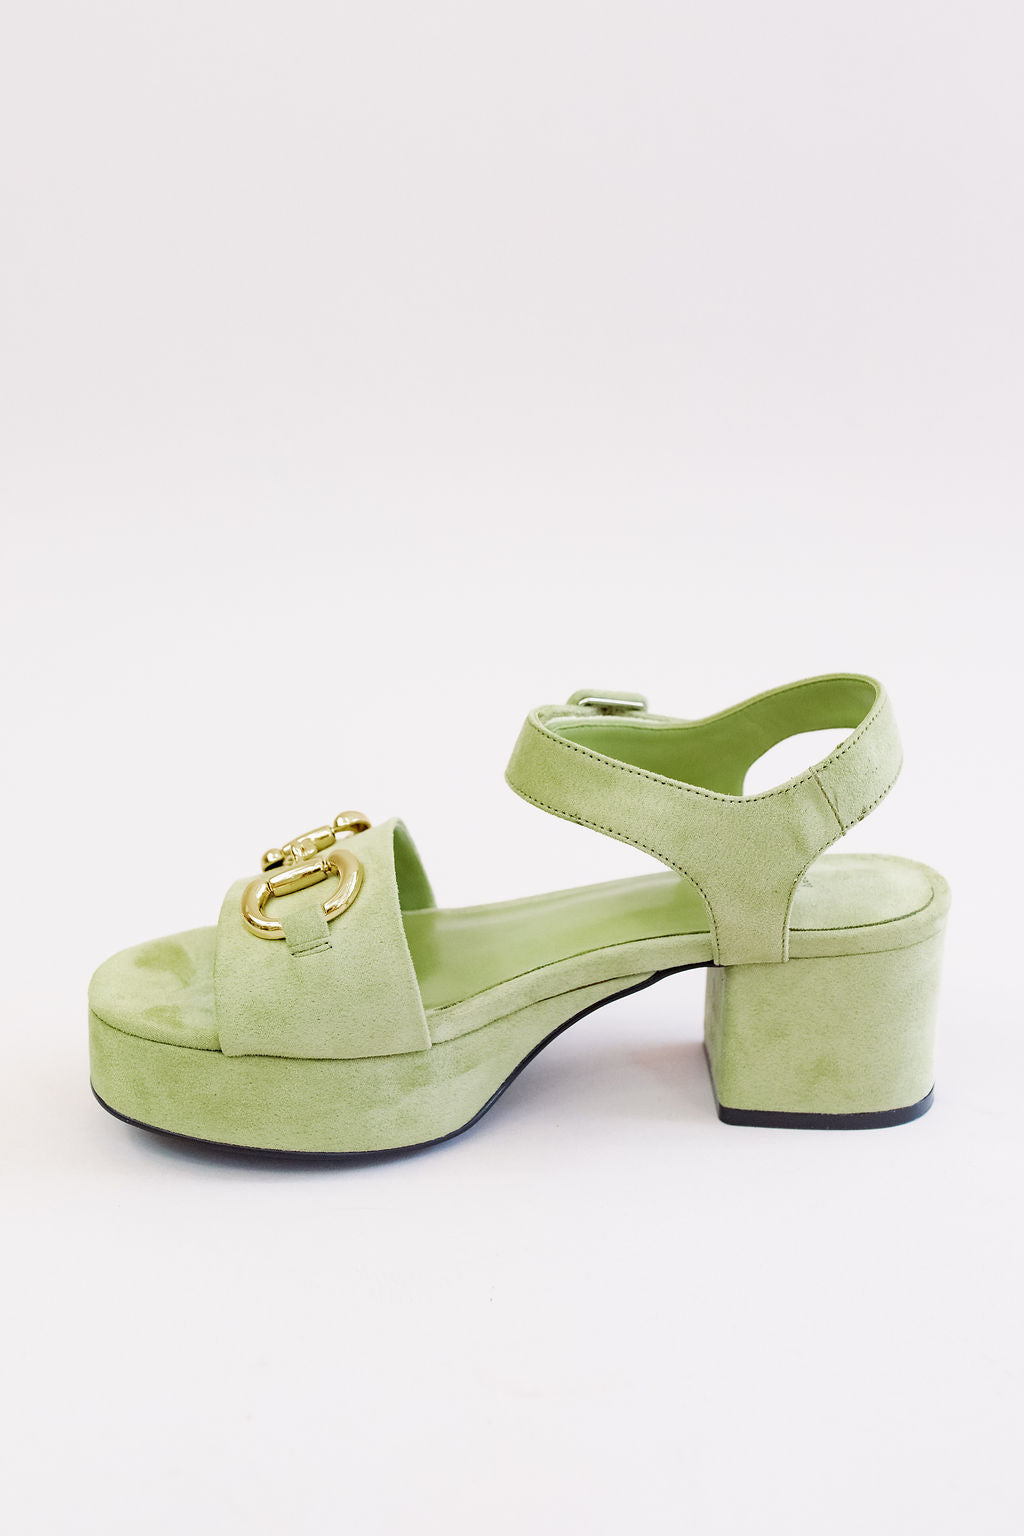 Jeffrey Campbell | Timeless Sandal | Green Suede Gold - Poppy and Stella